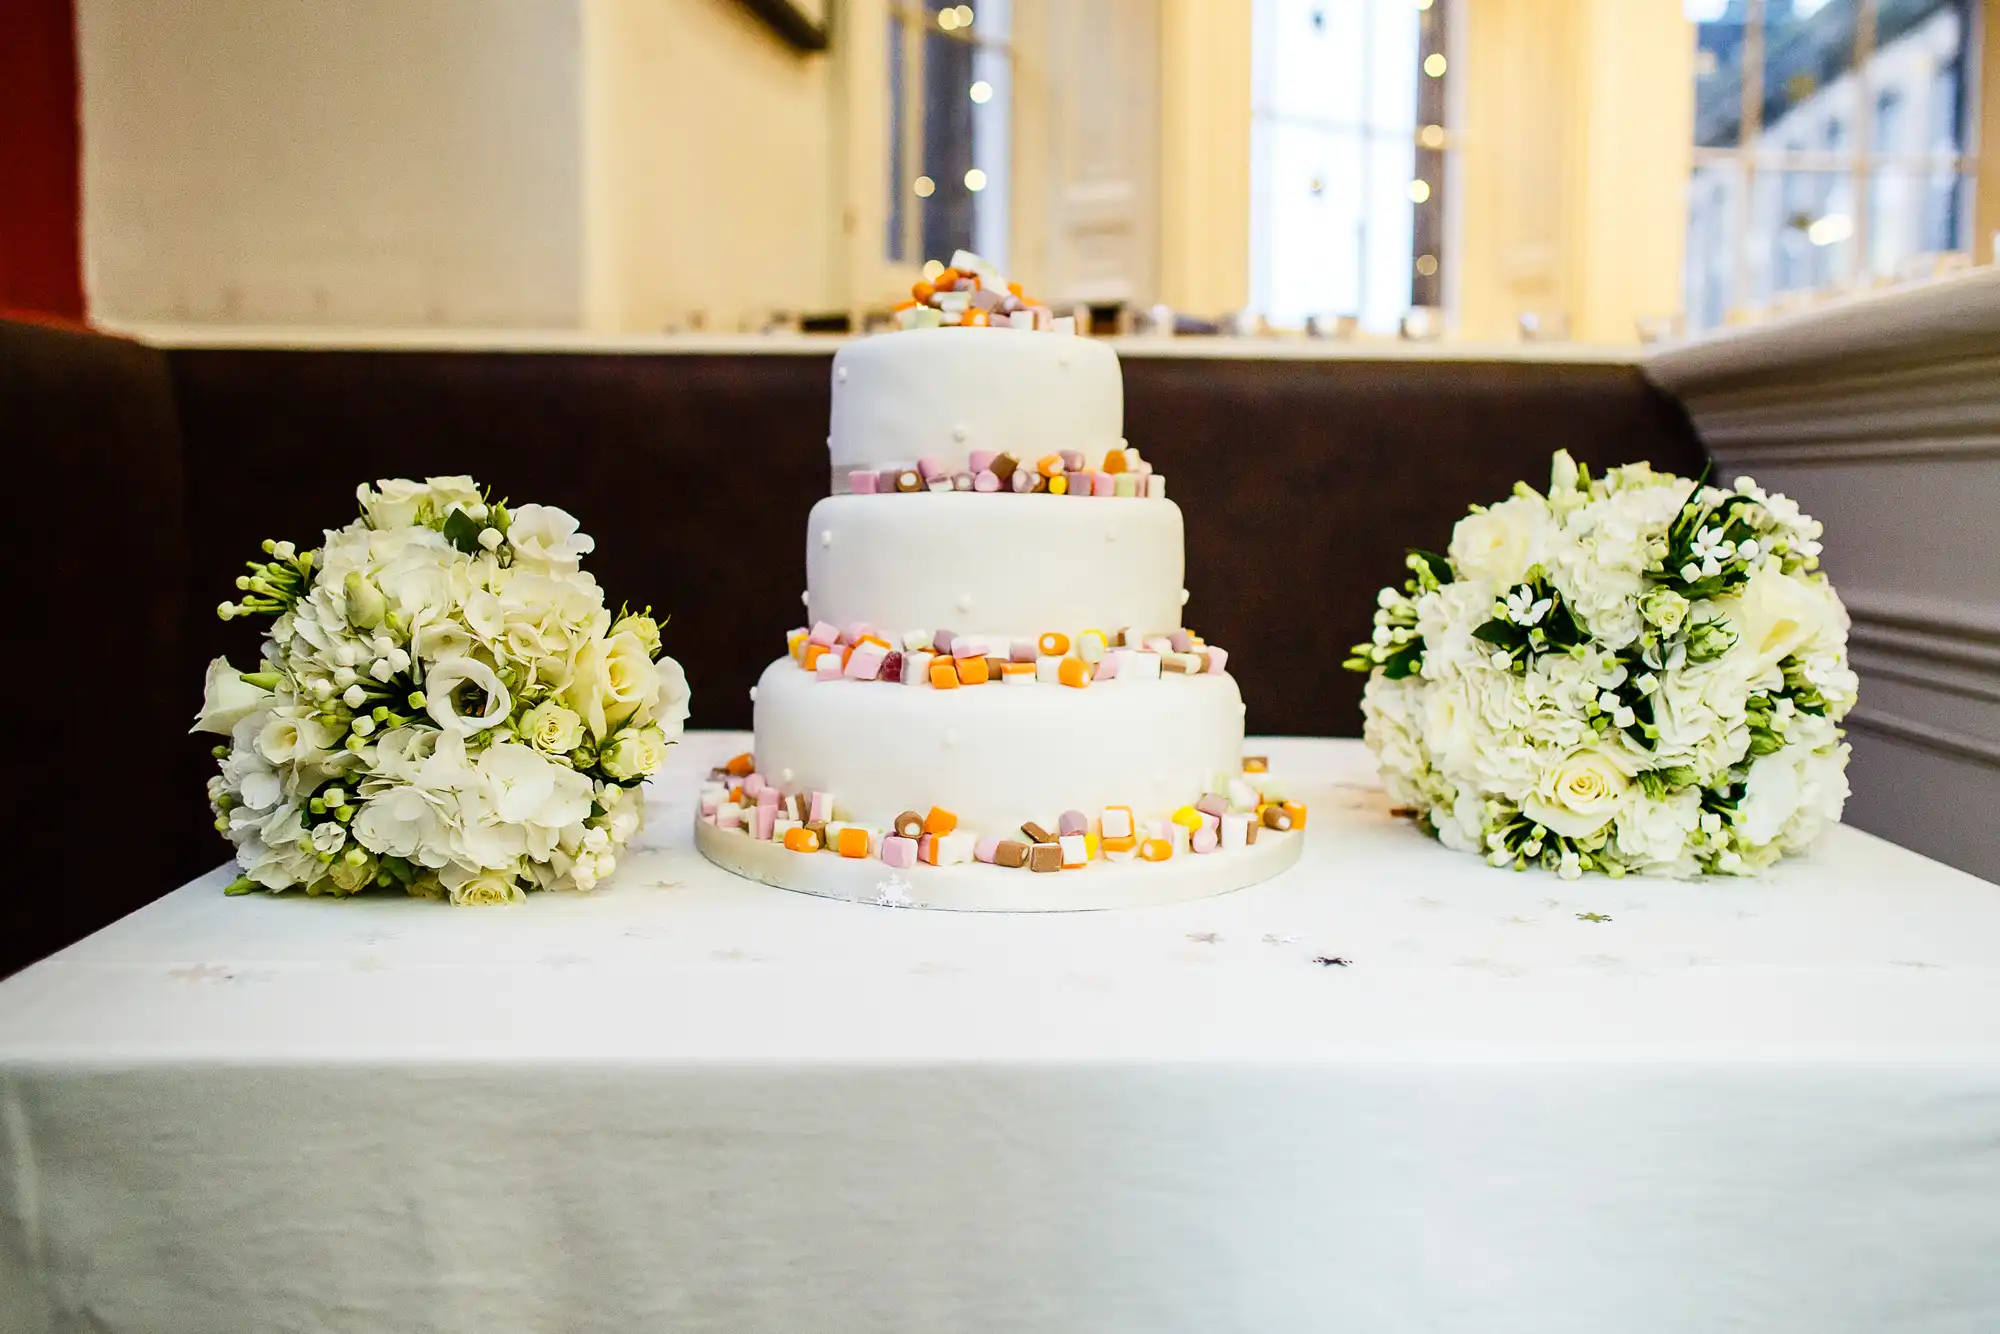 A four-tiered white wedding cake decorated with colorful candy, flanked by two bouquets of white and green flowers on a table.